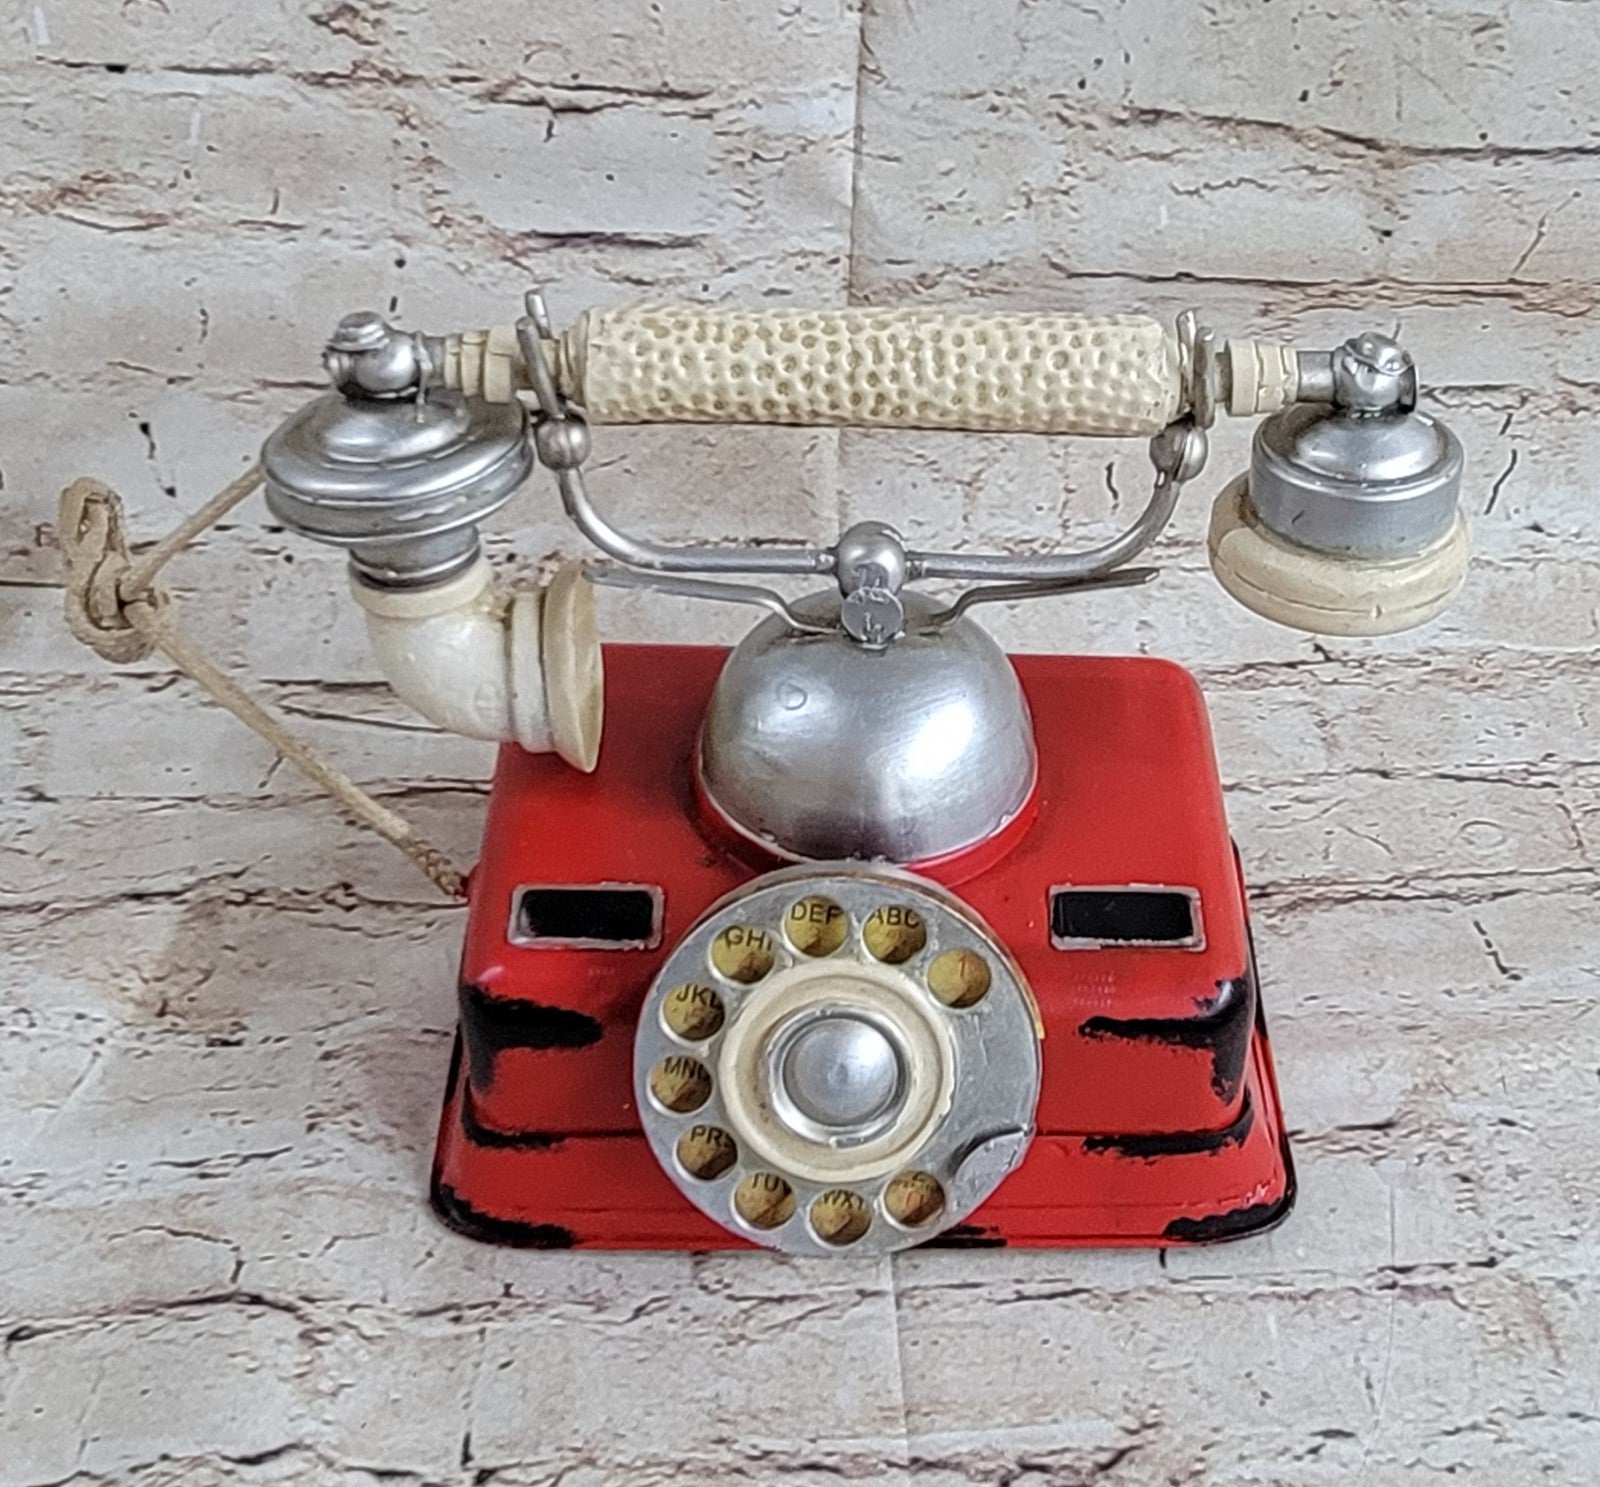 Rotary Dial Telephone Vintage Handset Phone Res Metal For Home Office Classic